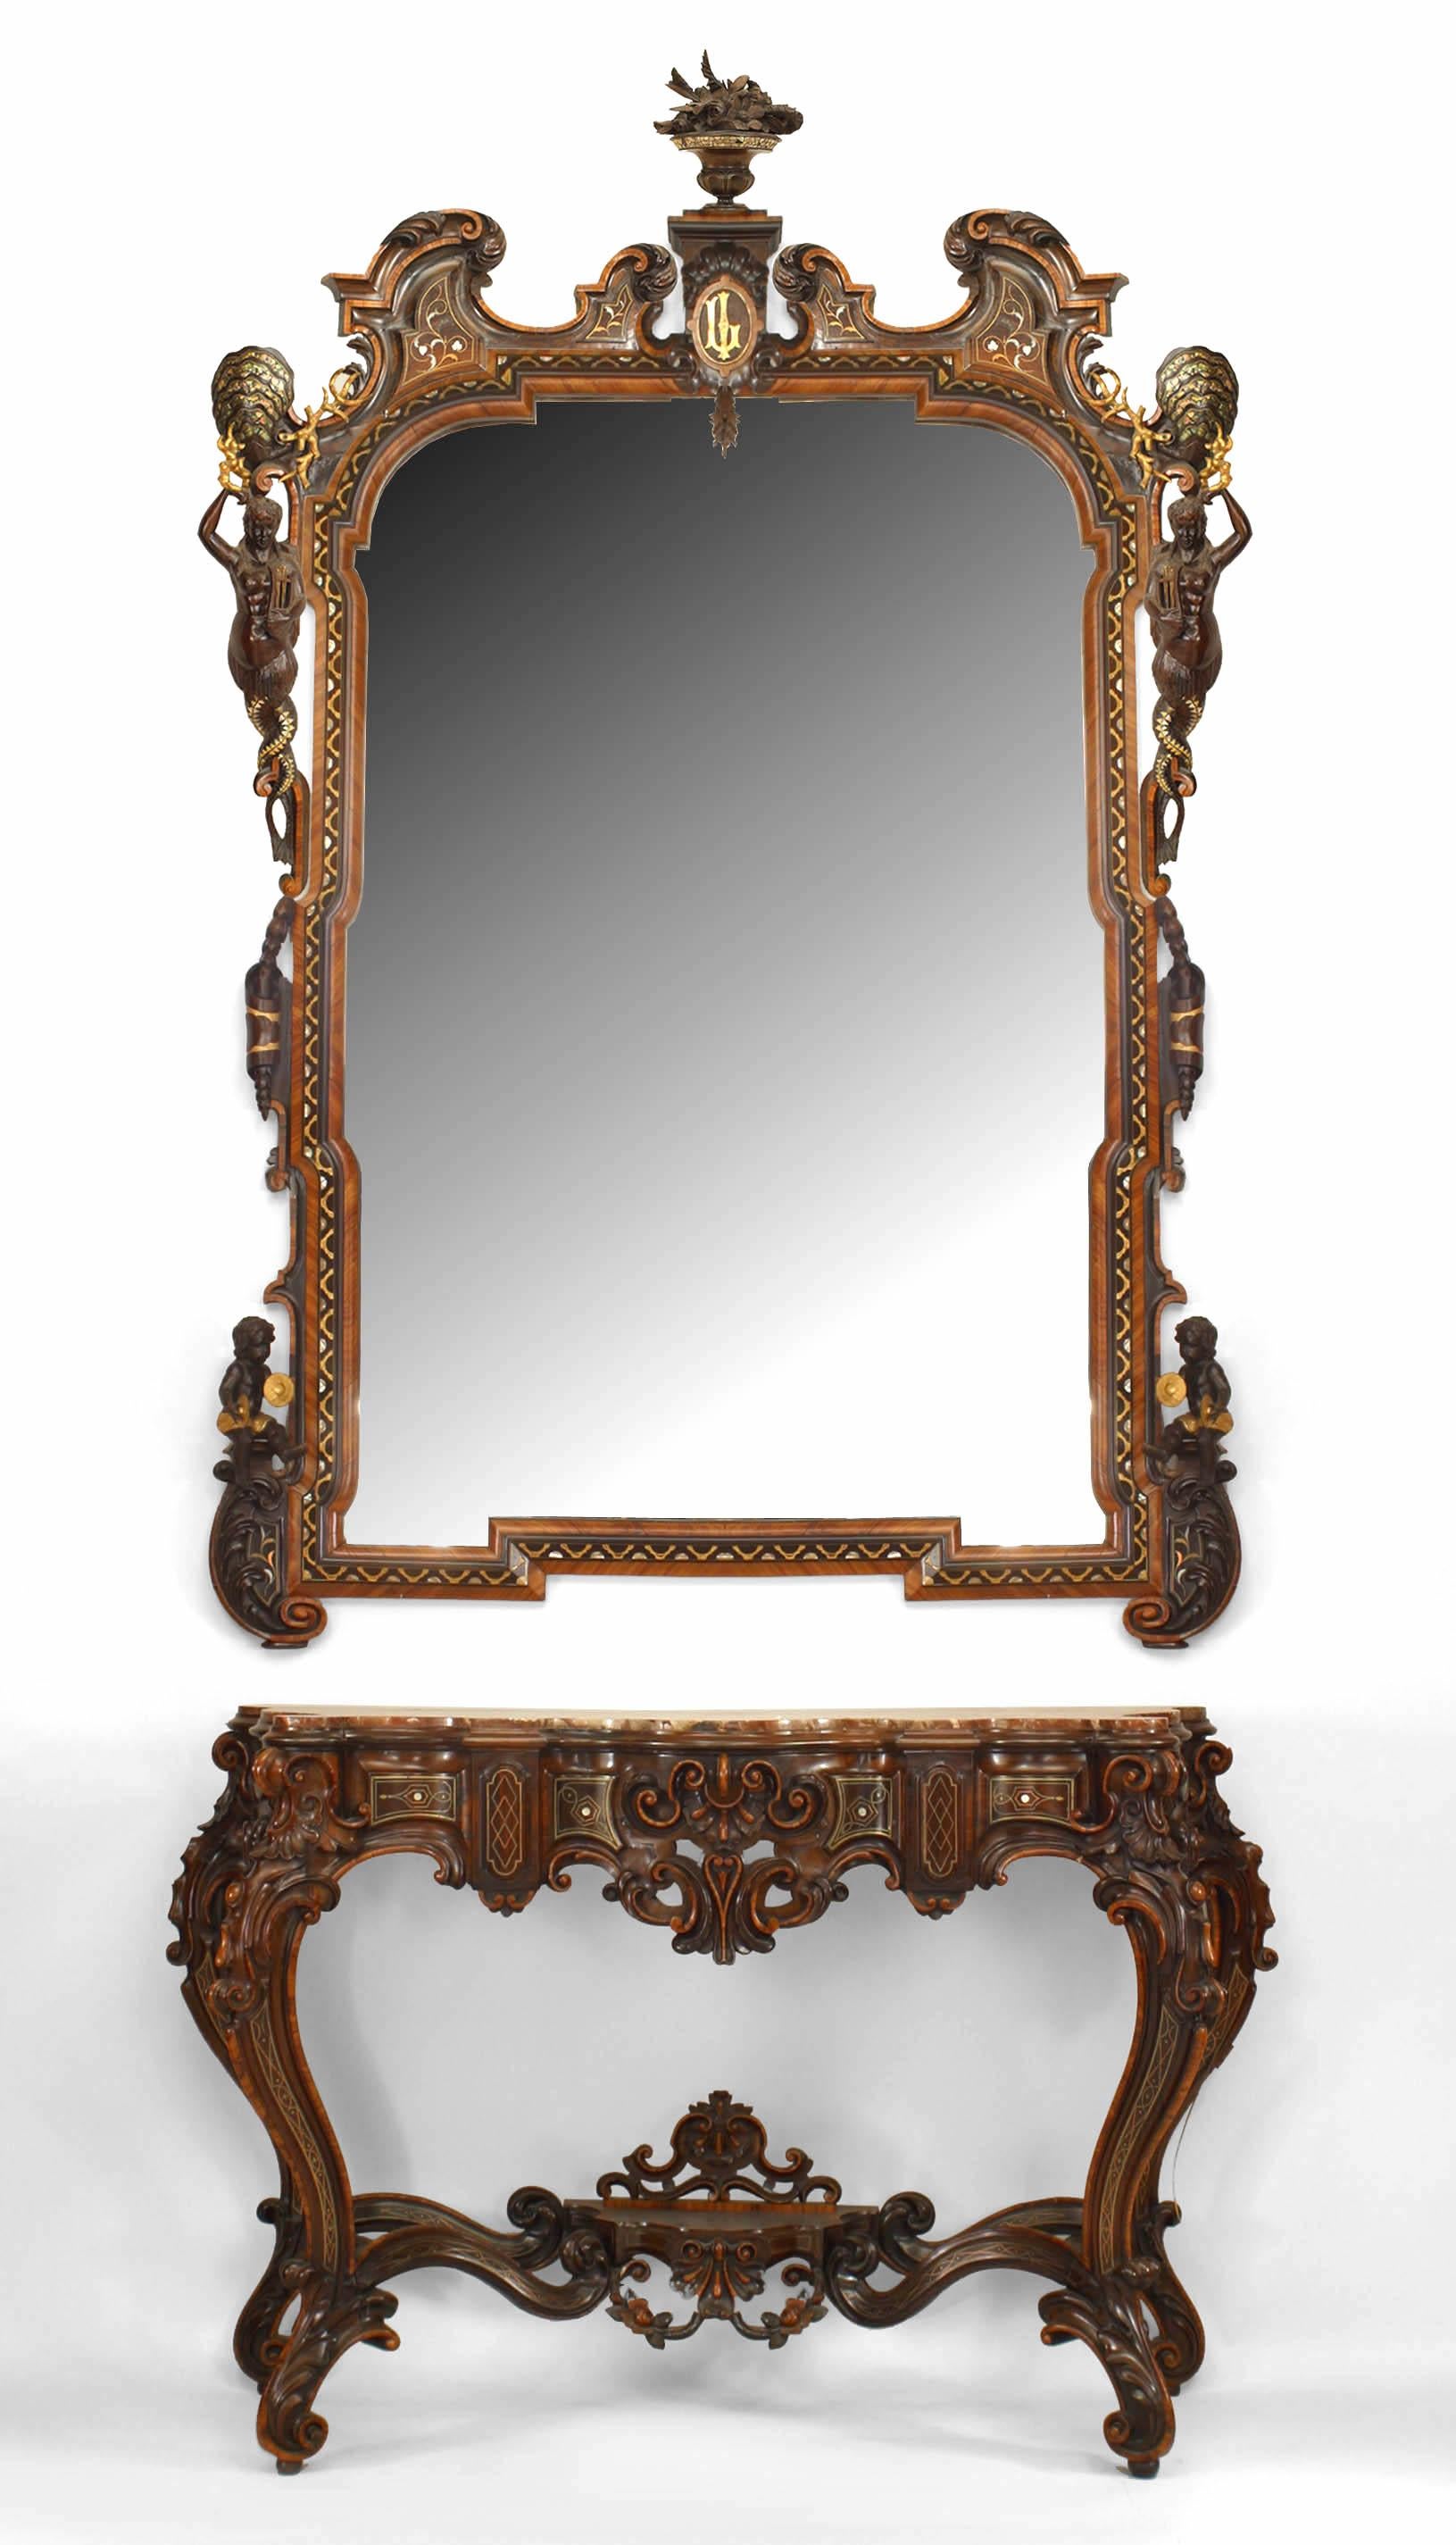 Pair of Italian Rococo Revival Carved Rosewood Wall Mirrors 